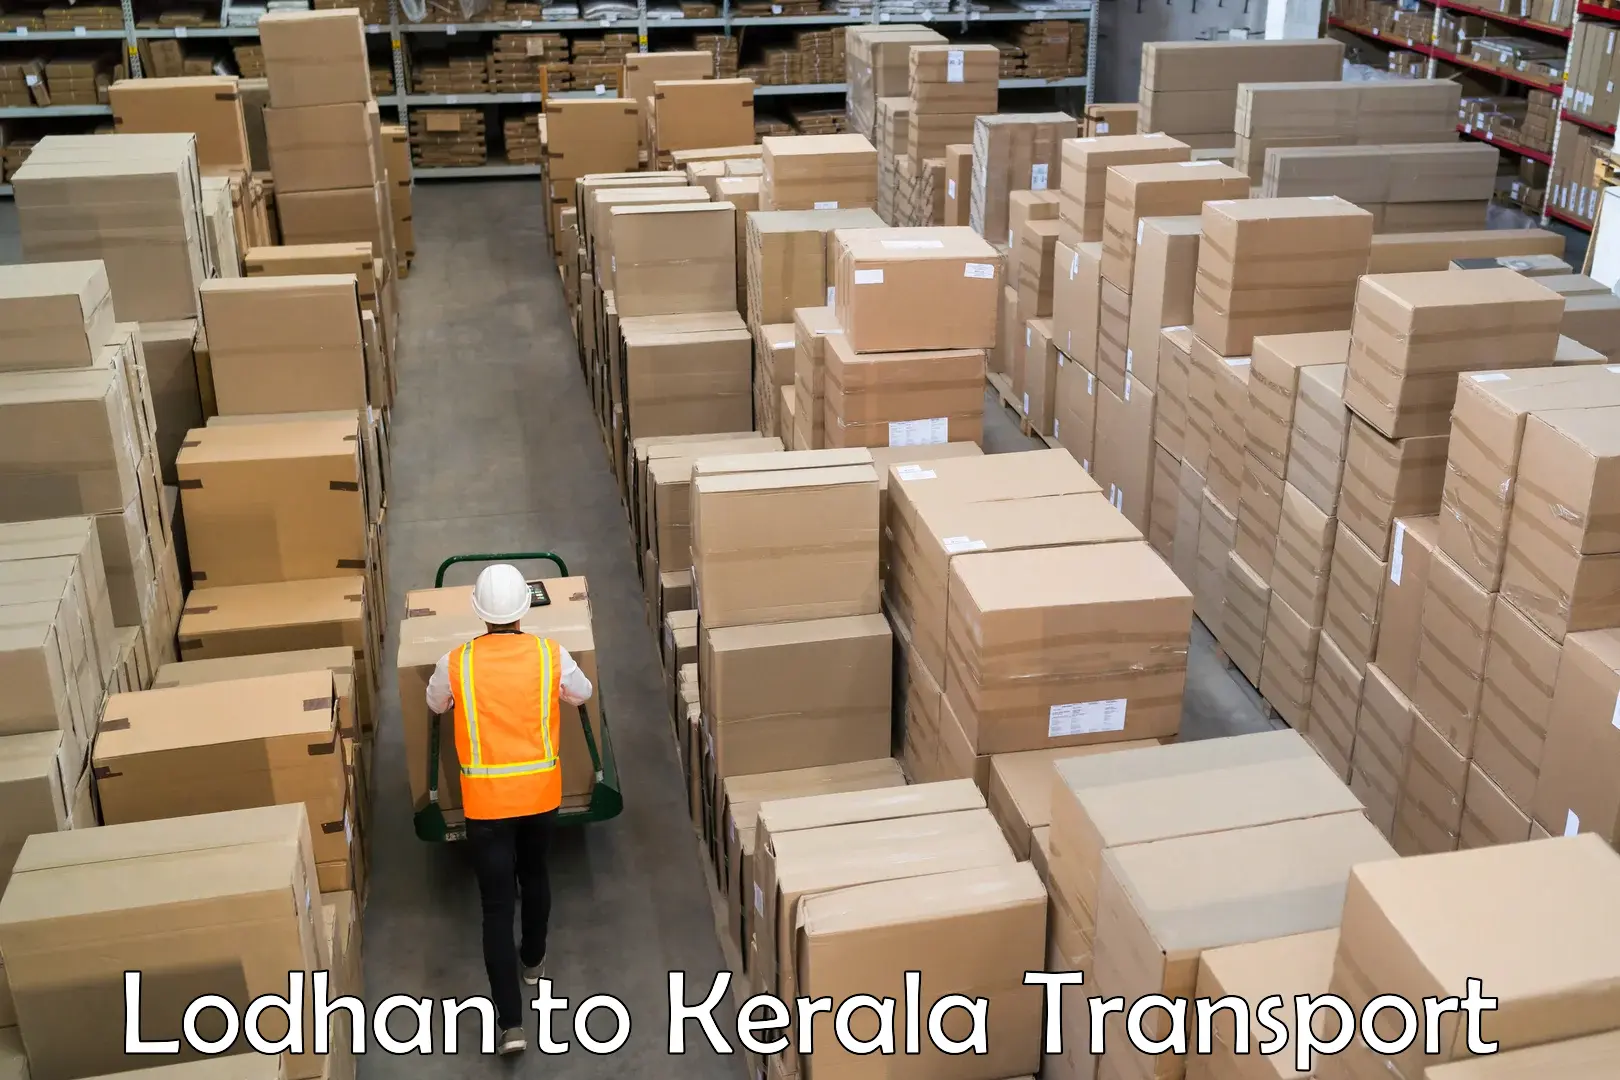 Pick up transport service Lodhan to Trivandrum